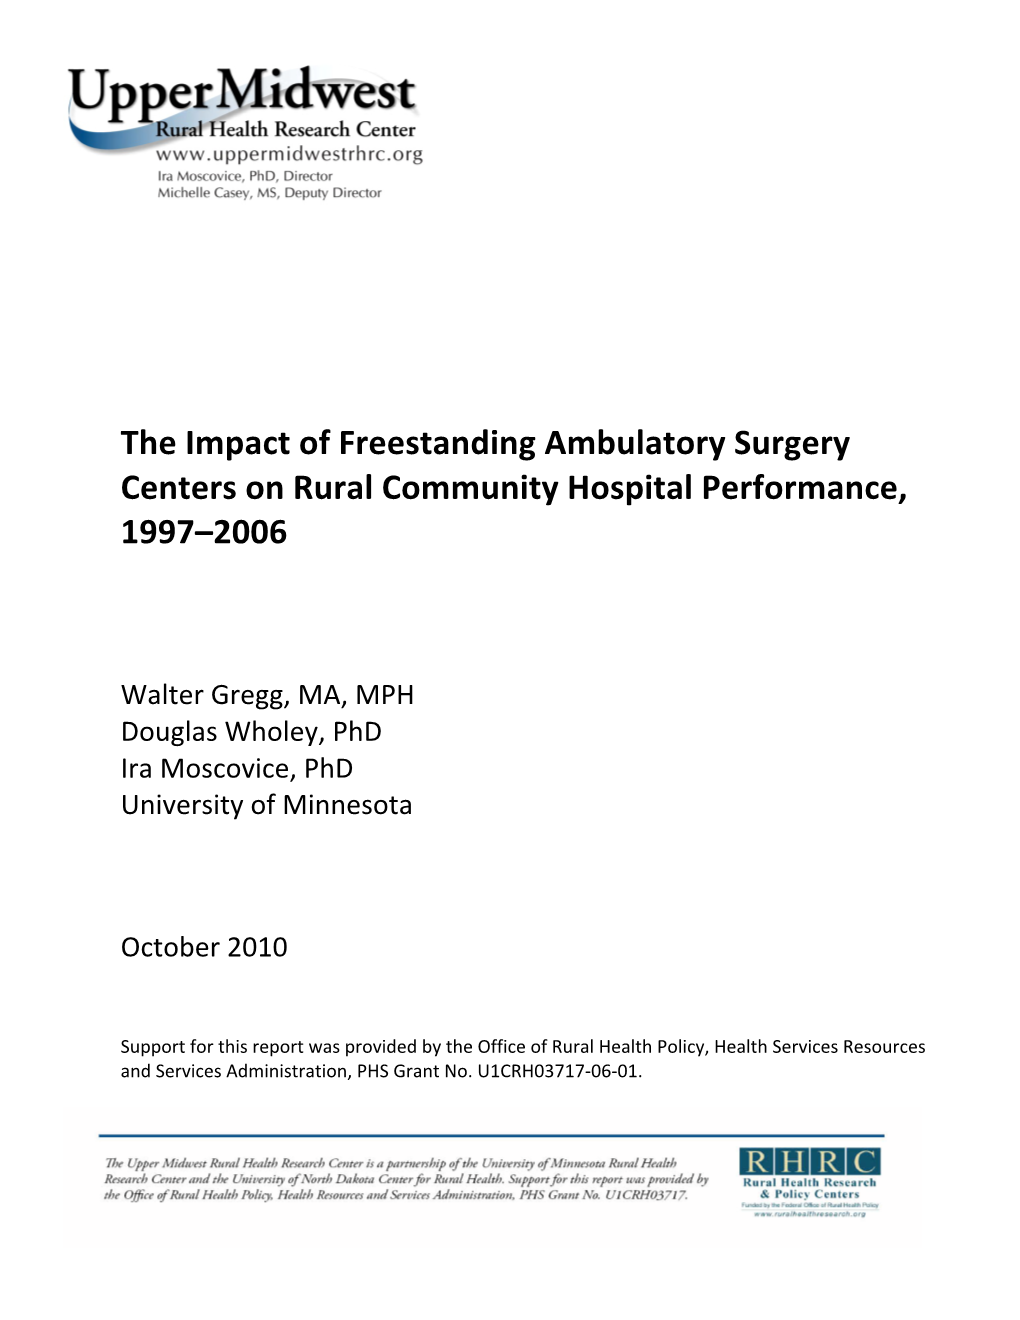 The Impact of Freestanding Ambulatory Surgery Centers on Rural Community Hospital Performance, 1997–2006